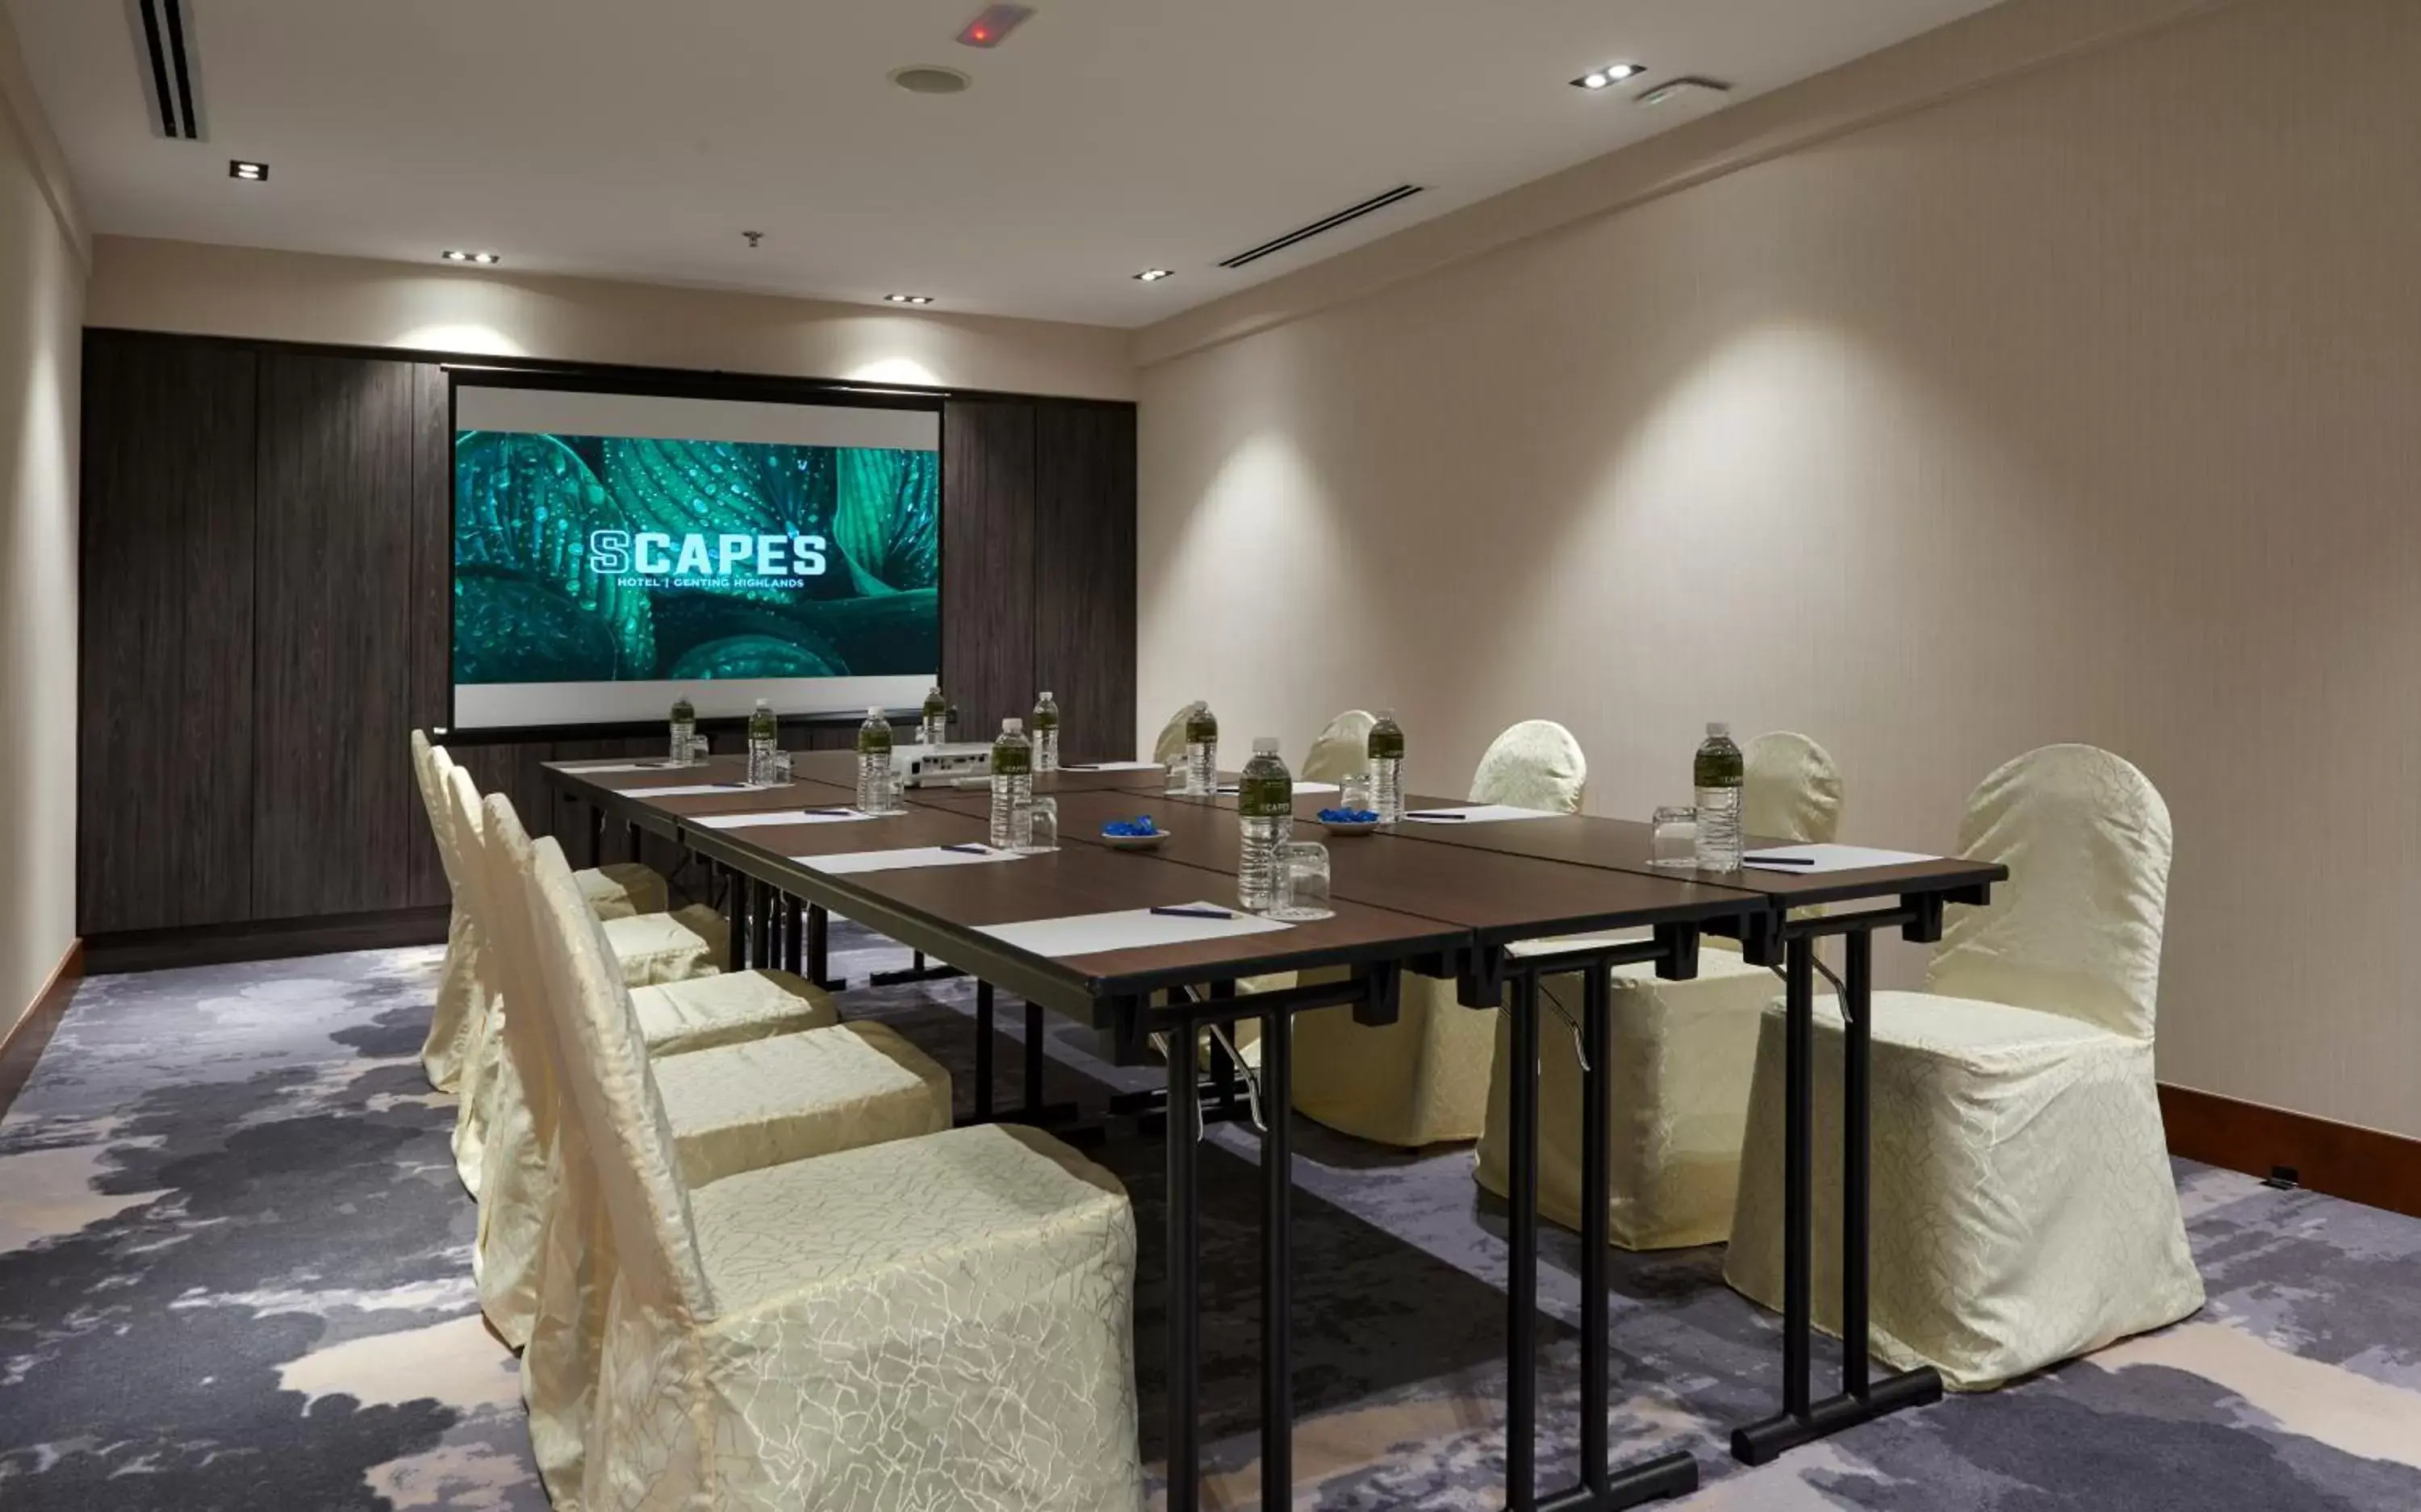 Meeting/conference room in SCAPES Hotel